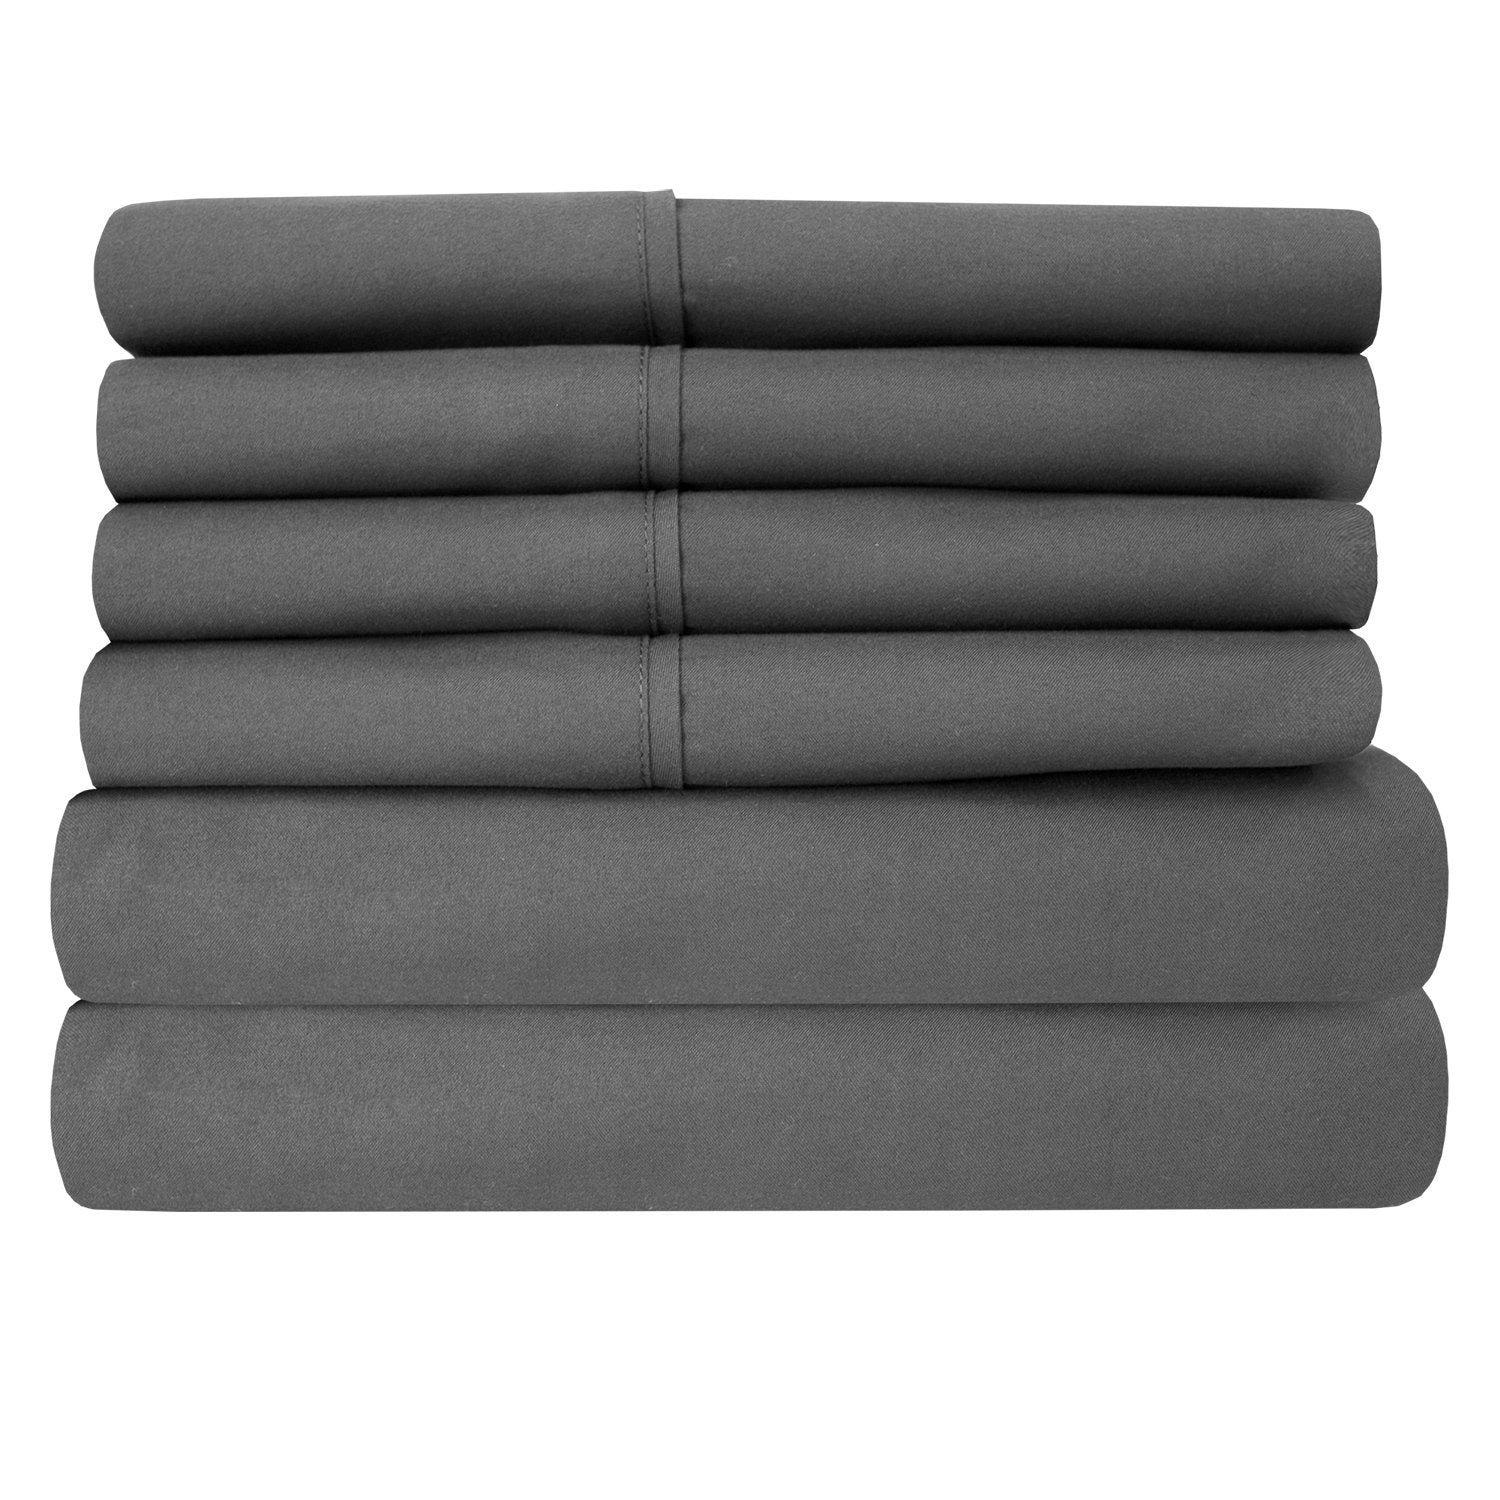 Deluxe 6-Piece Bed Sheet Set (Gray) - Folded 2